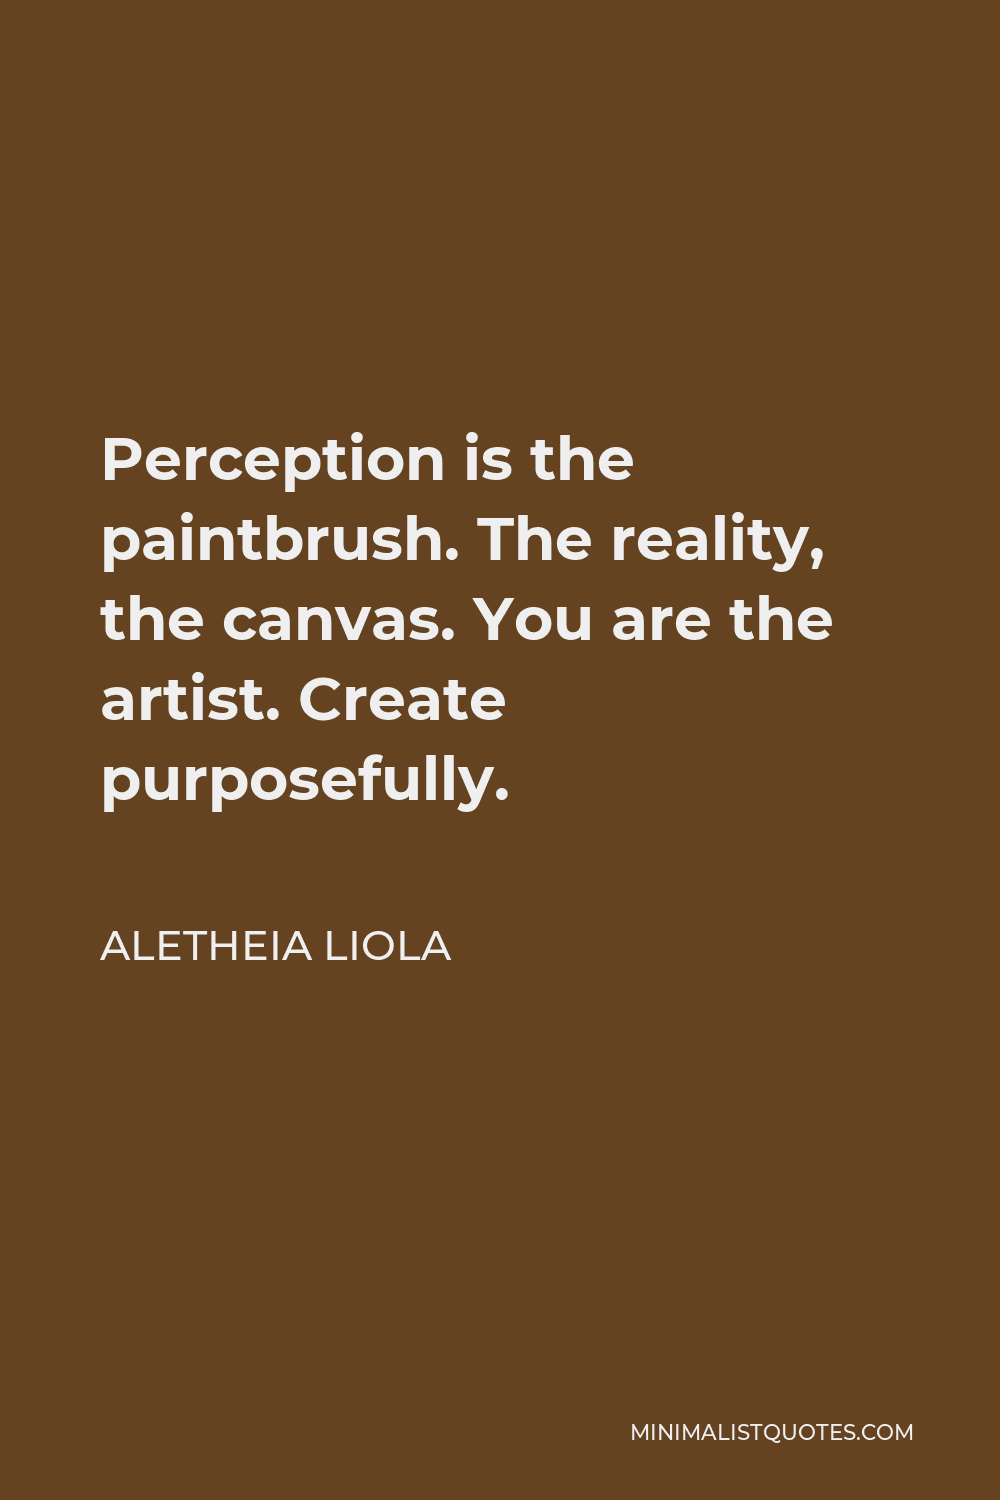 Aletheia Liola Quote - Perception is the paintbrush. The reality, the canvas. You are the artist. Create purposefully.